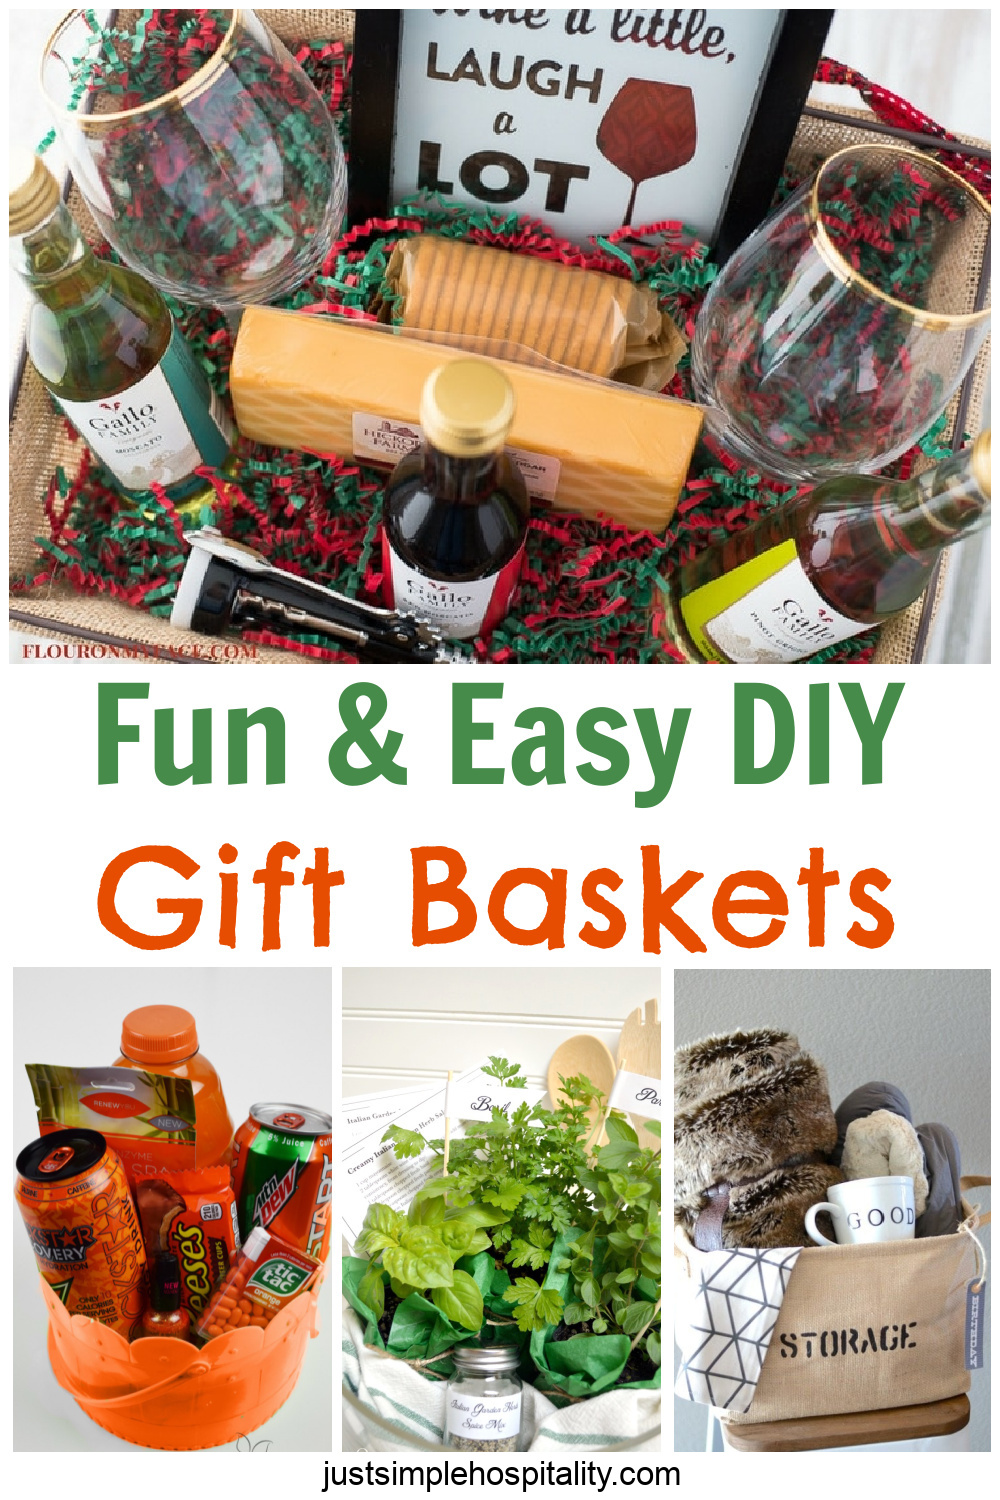 https://justsimplehospitality.com/wp-content/uploads/2021/12/Fun-and-Easy-DIY-Gift-Baskets-Titled-URL-Pat.jpg